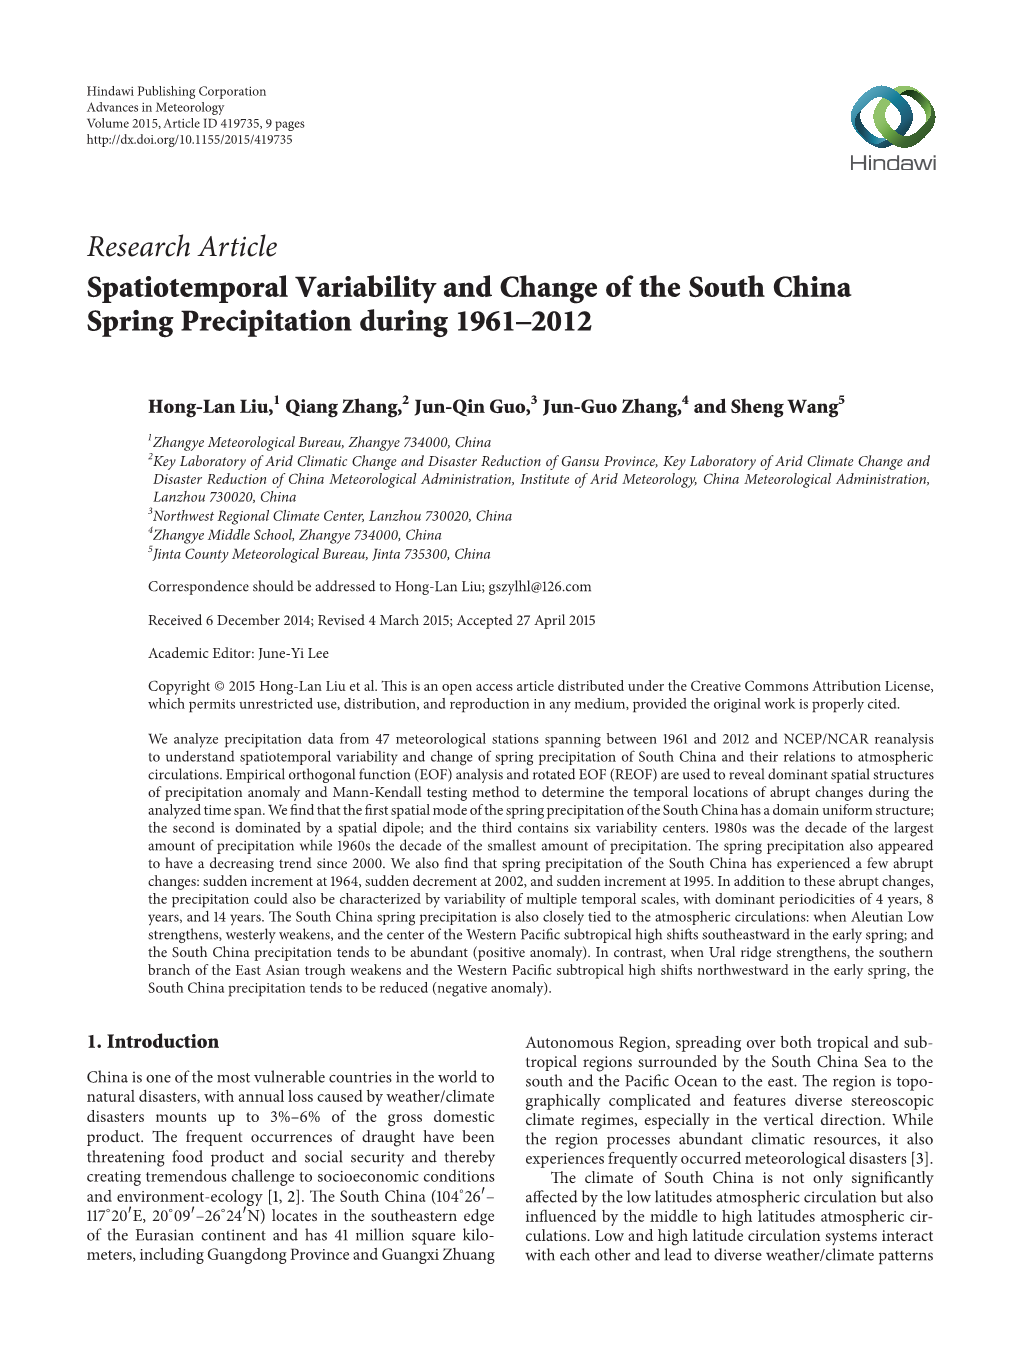 Spatiotemporal Variability and Change of the South China Spring Precipitation During 1961–2012